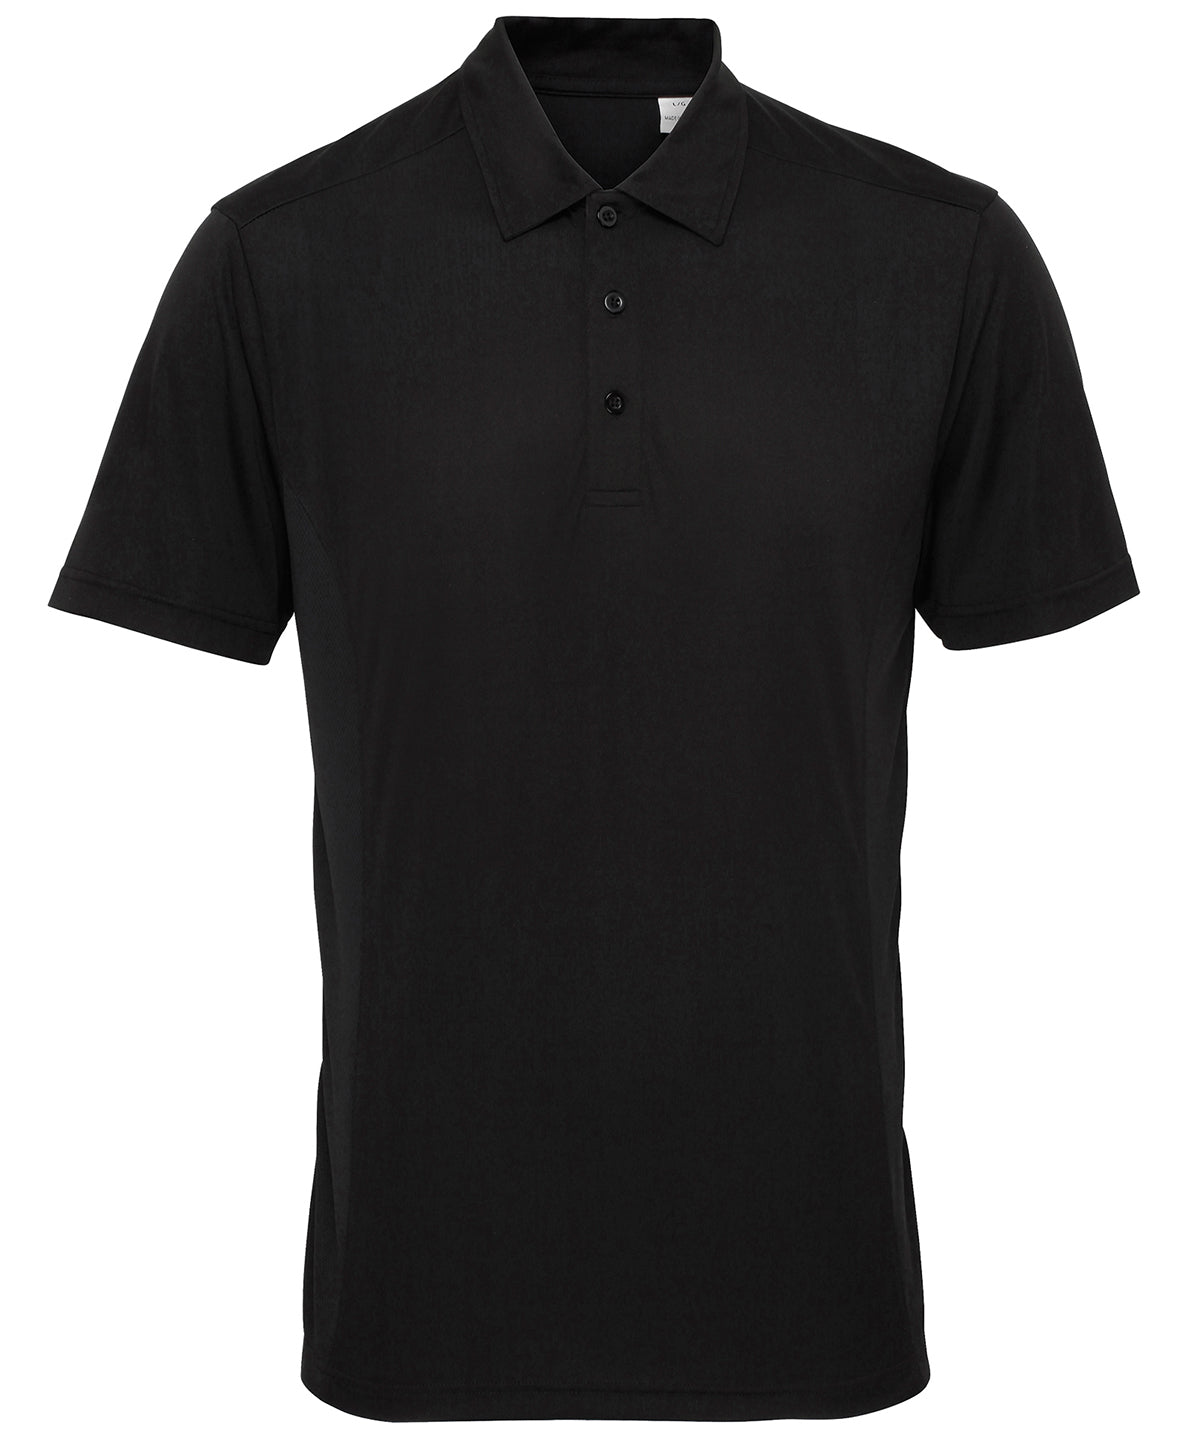 Black - TriDri® panelled polo Polos TriDri® Activewear & Performance, Athleisurewear, Exclusives, Must Haves, Plus Sizes, Polos & Casual, Raladeal - Recently Added, Rebrandable, Sports & Leisure, Team Sportswear, UPF Protection Schoolwear Centres